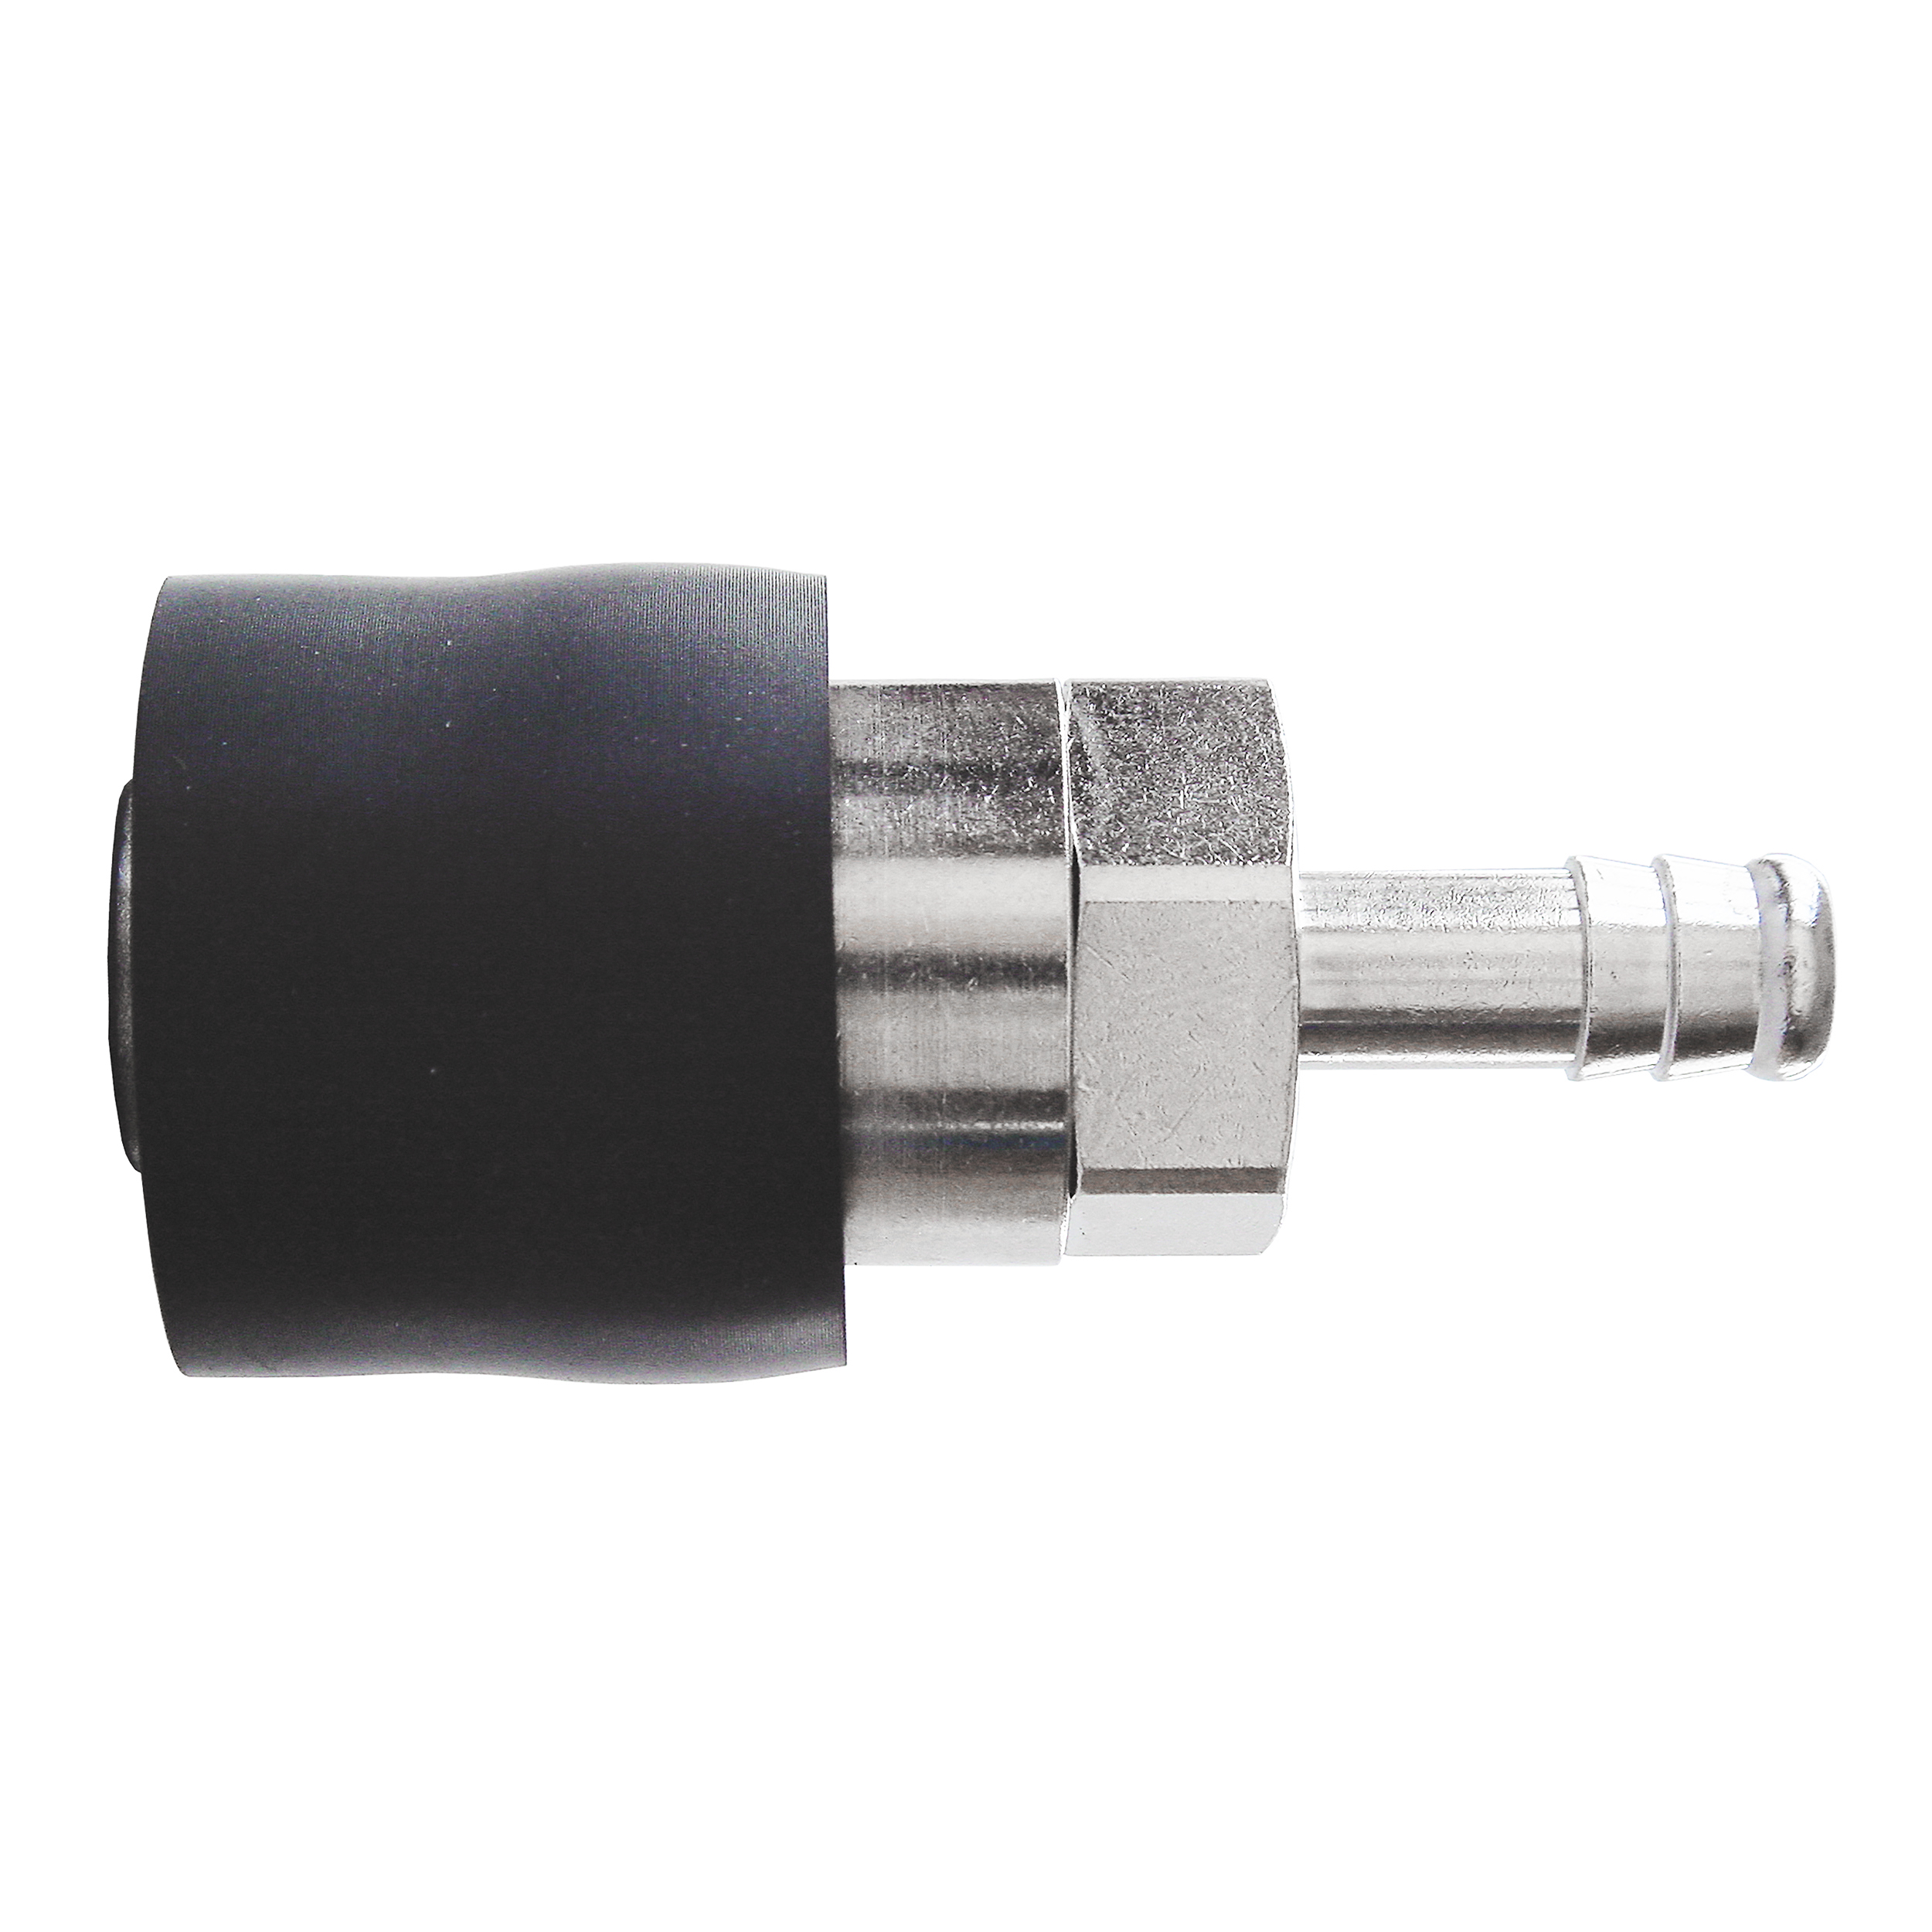 DN 7.8 safety coupling, QN 2,093 Nl/min, MOP 116 psi, hose nozzle DN 13 with rubber safety sleeve, length: 77 mm, AF 24